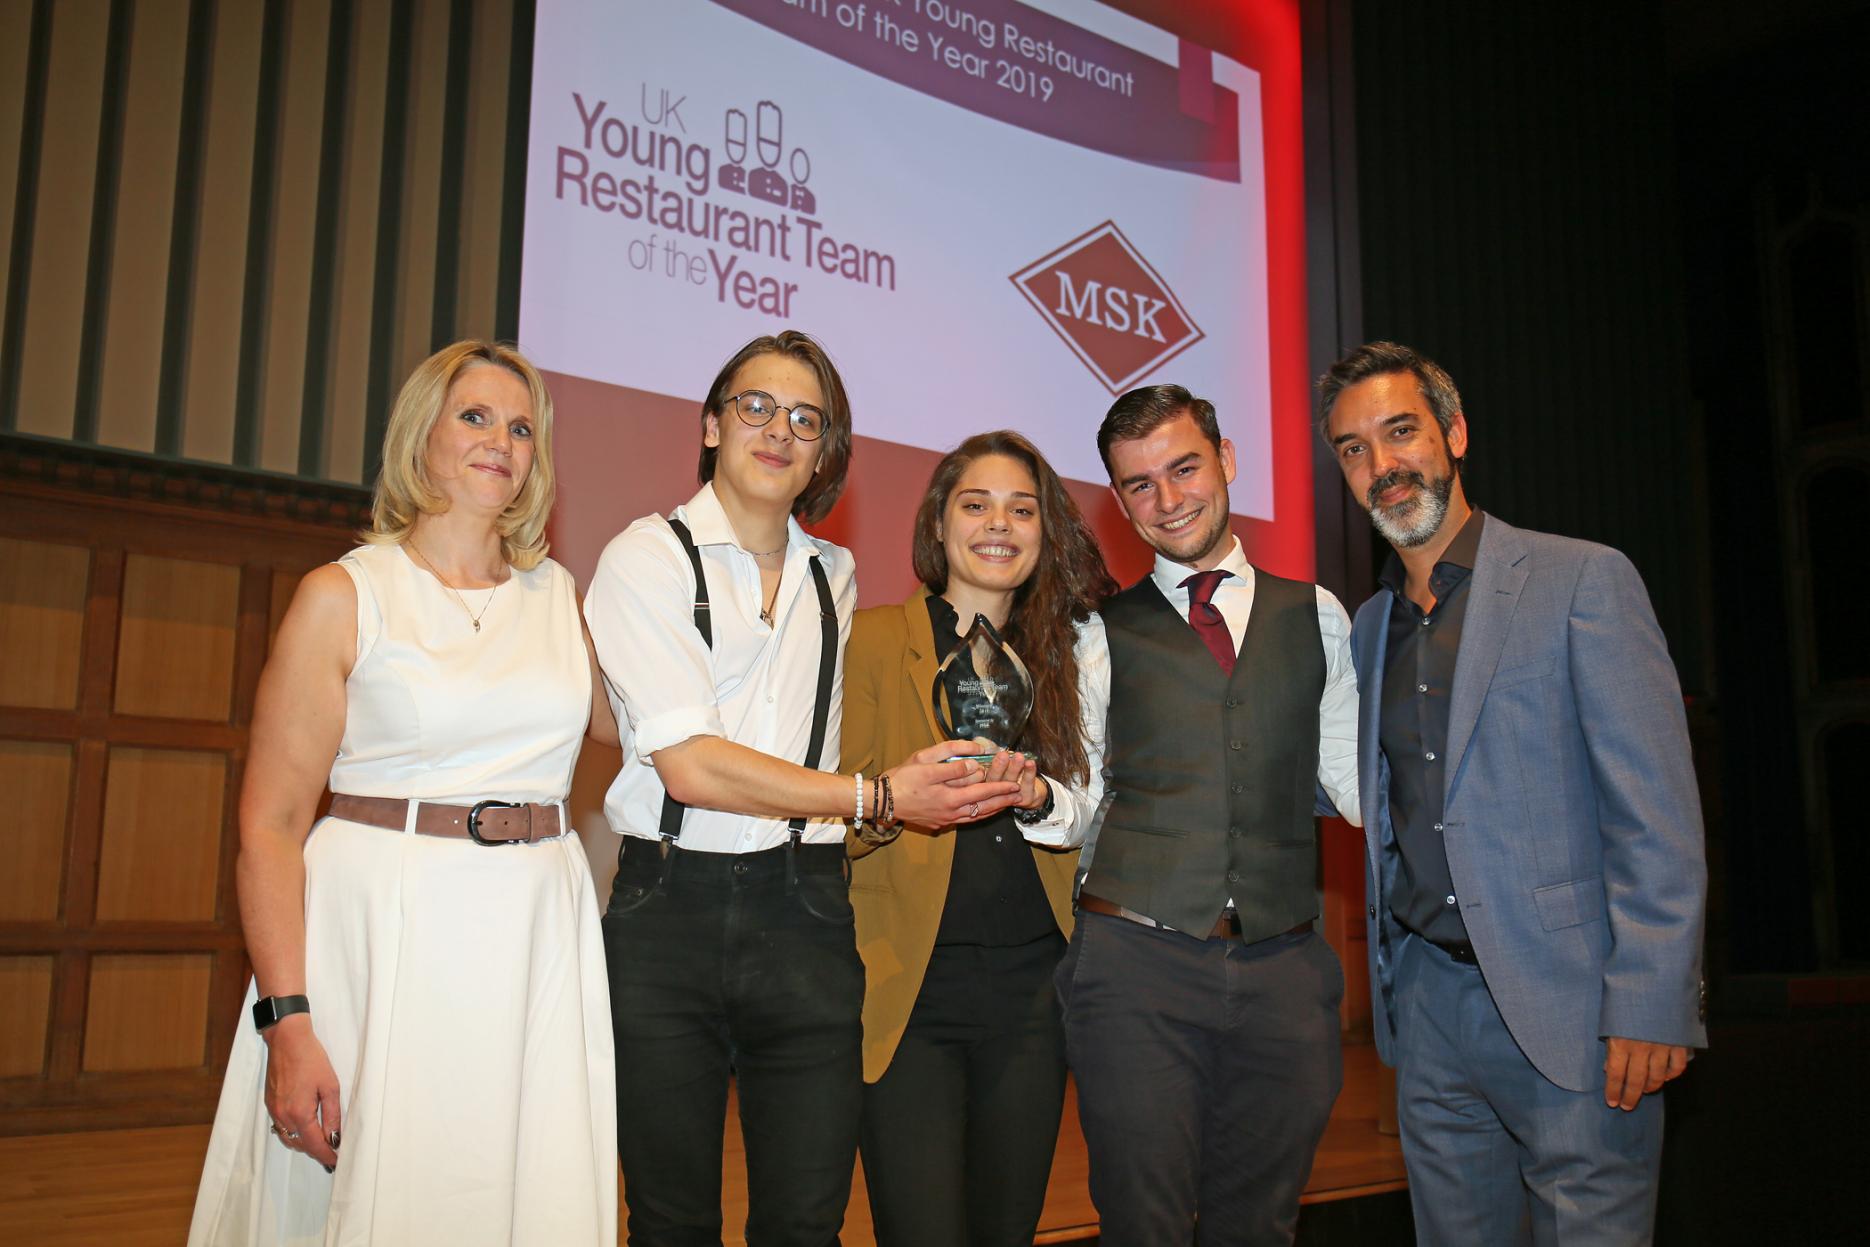 UK Young Restaurant Team of the Year announced 